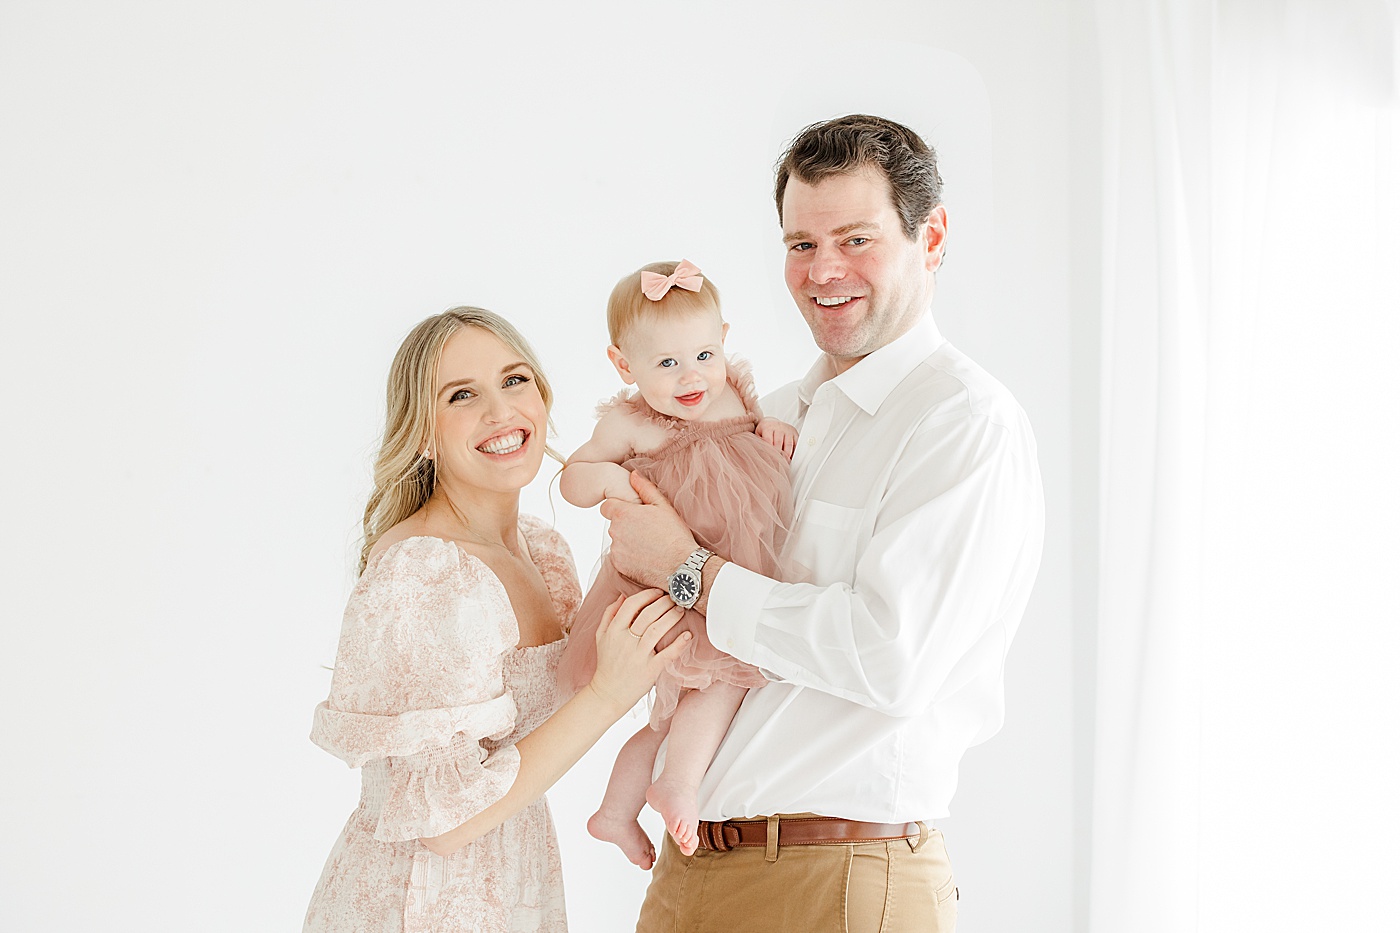 Mom and Dad with daughter during first birthday photoshoot with Kristin Wood Photography.